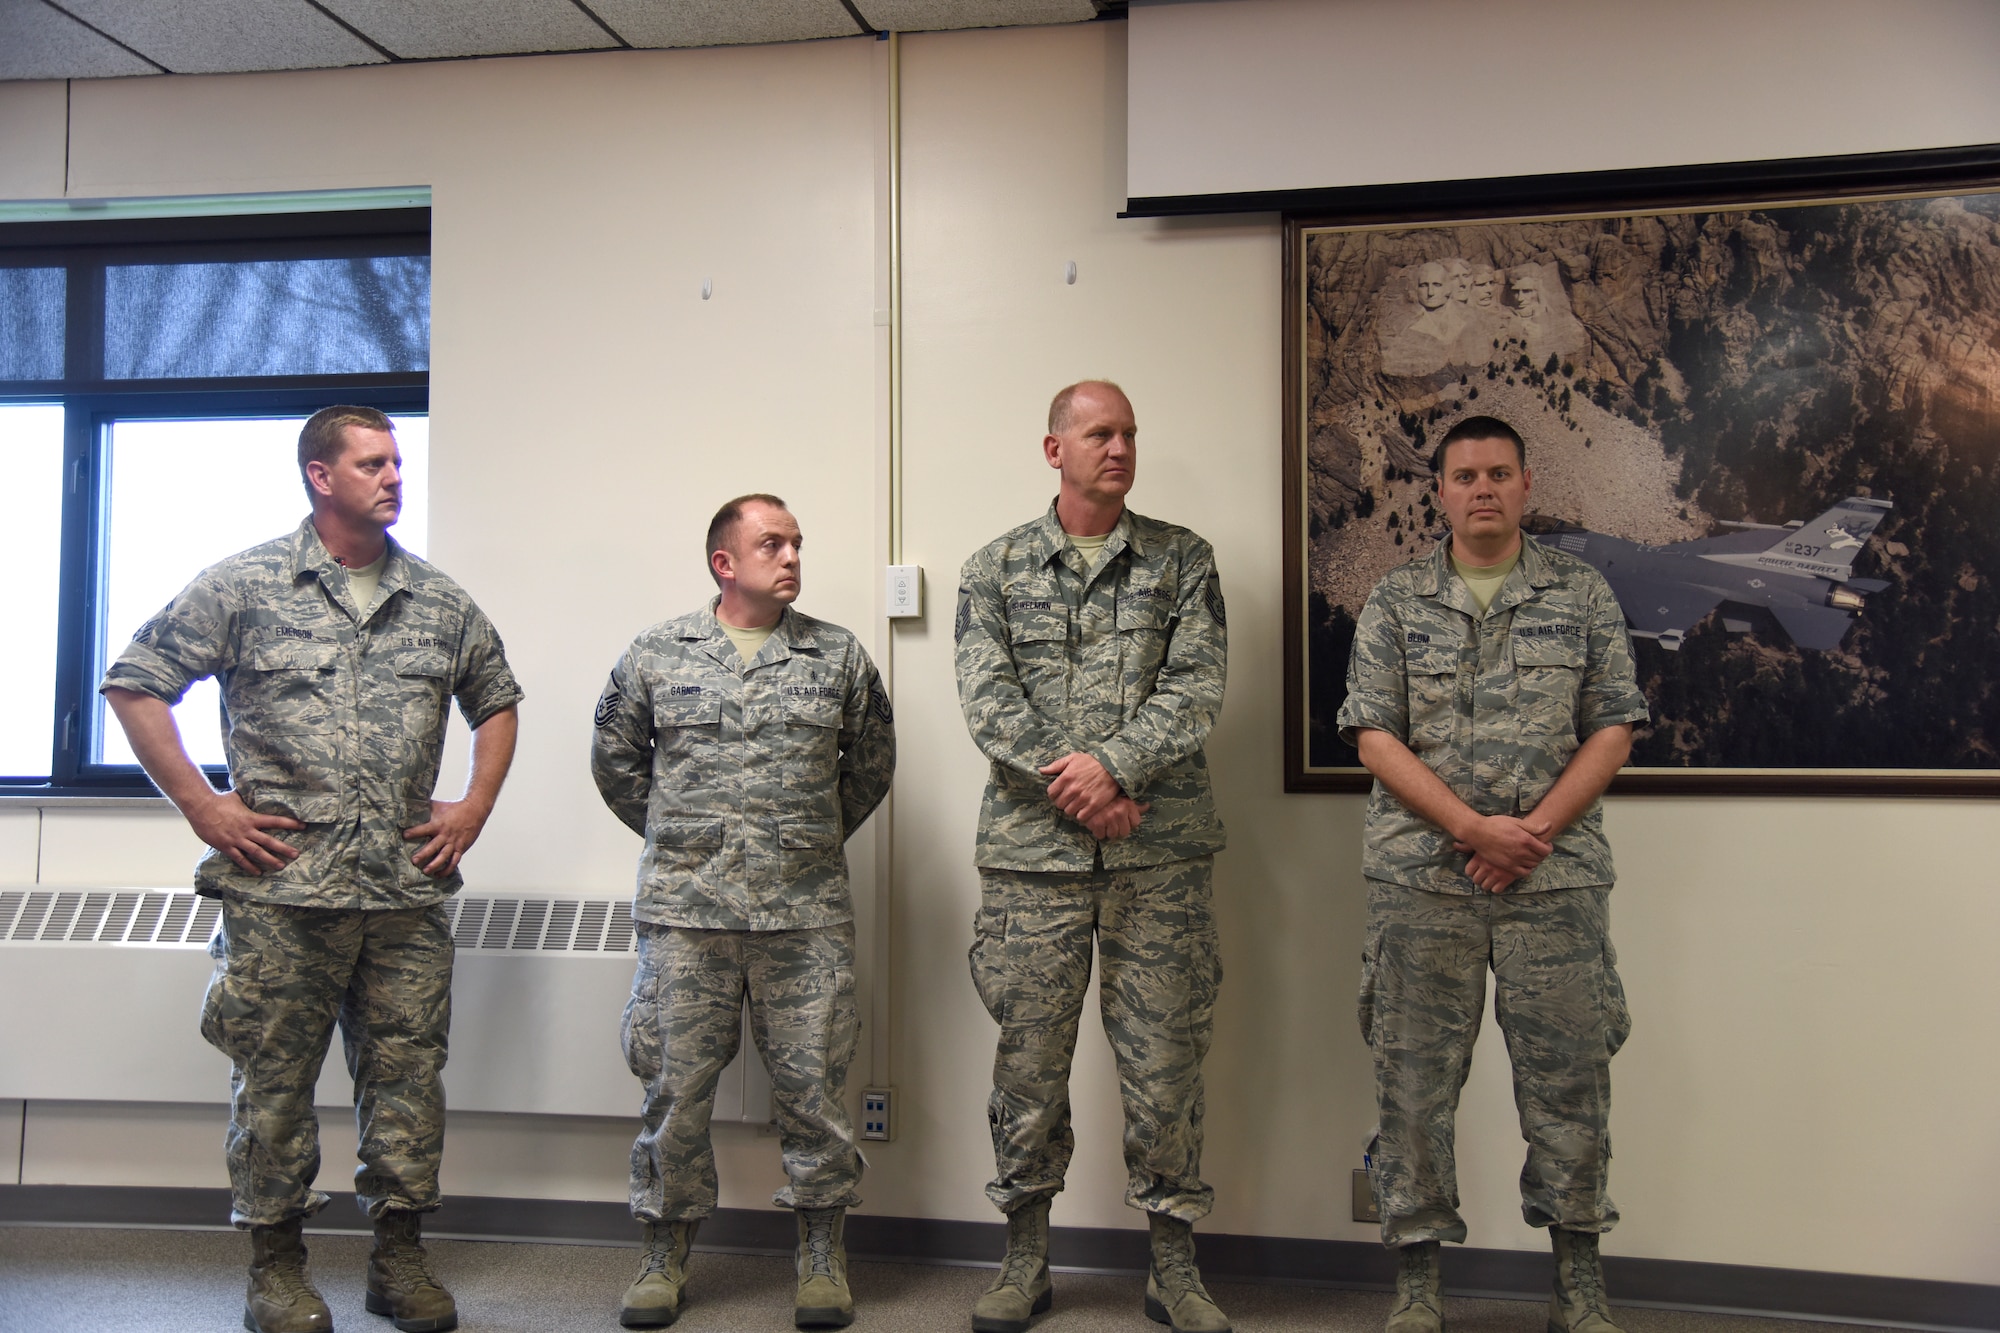 SIOUX FALLS, S.D. - Pictured left to right, Senior Master Sgt. Shawn Emerson, Master Sgt. Brent Garner, Master Sgt. Paul Beukelman, and Tech. Sgt. Nate Blom, all full-time employees of the South Dakota Air National Guard, listen as Col. Nate Alholinna, 114th Fighter Wing vice commander, reads a letter from Lutheran Social Services commending the Airmen for the time they spent as mentors over the past year. Master Sgt. Casey Bullis is also a mentor under this program but was not available for the photograph.(U.S. National Guard photo by Senior Master Sgt. Nancy Ausland)